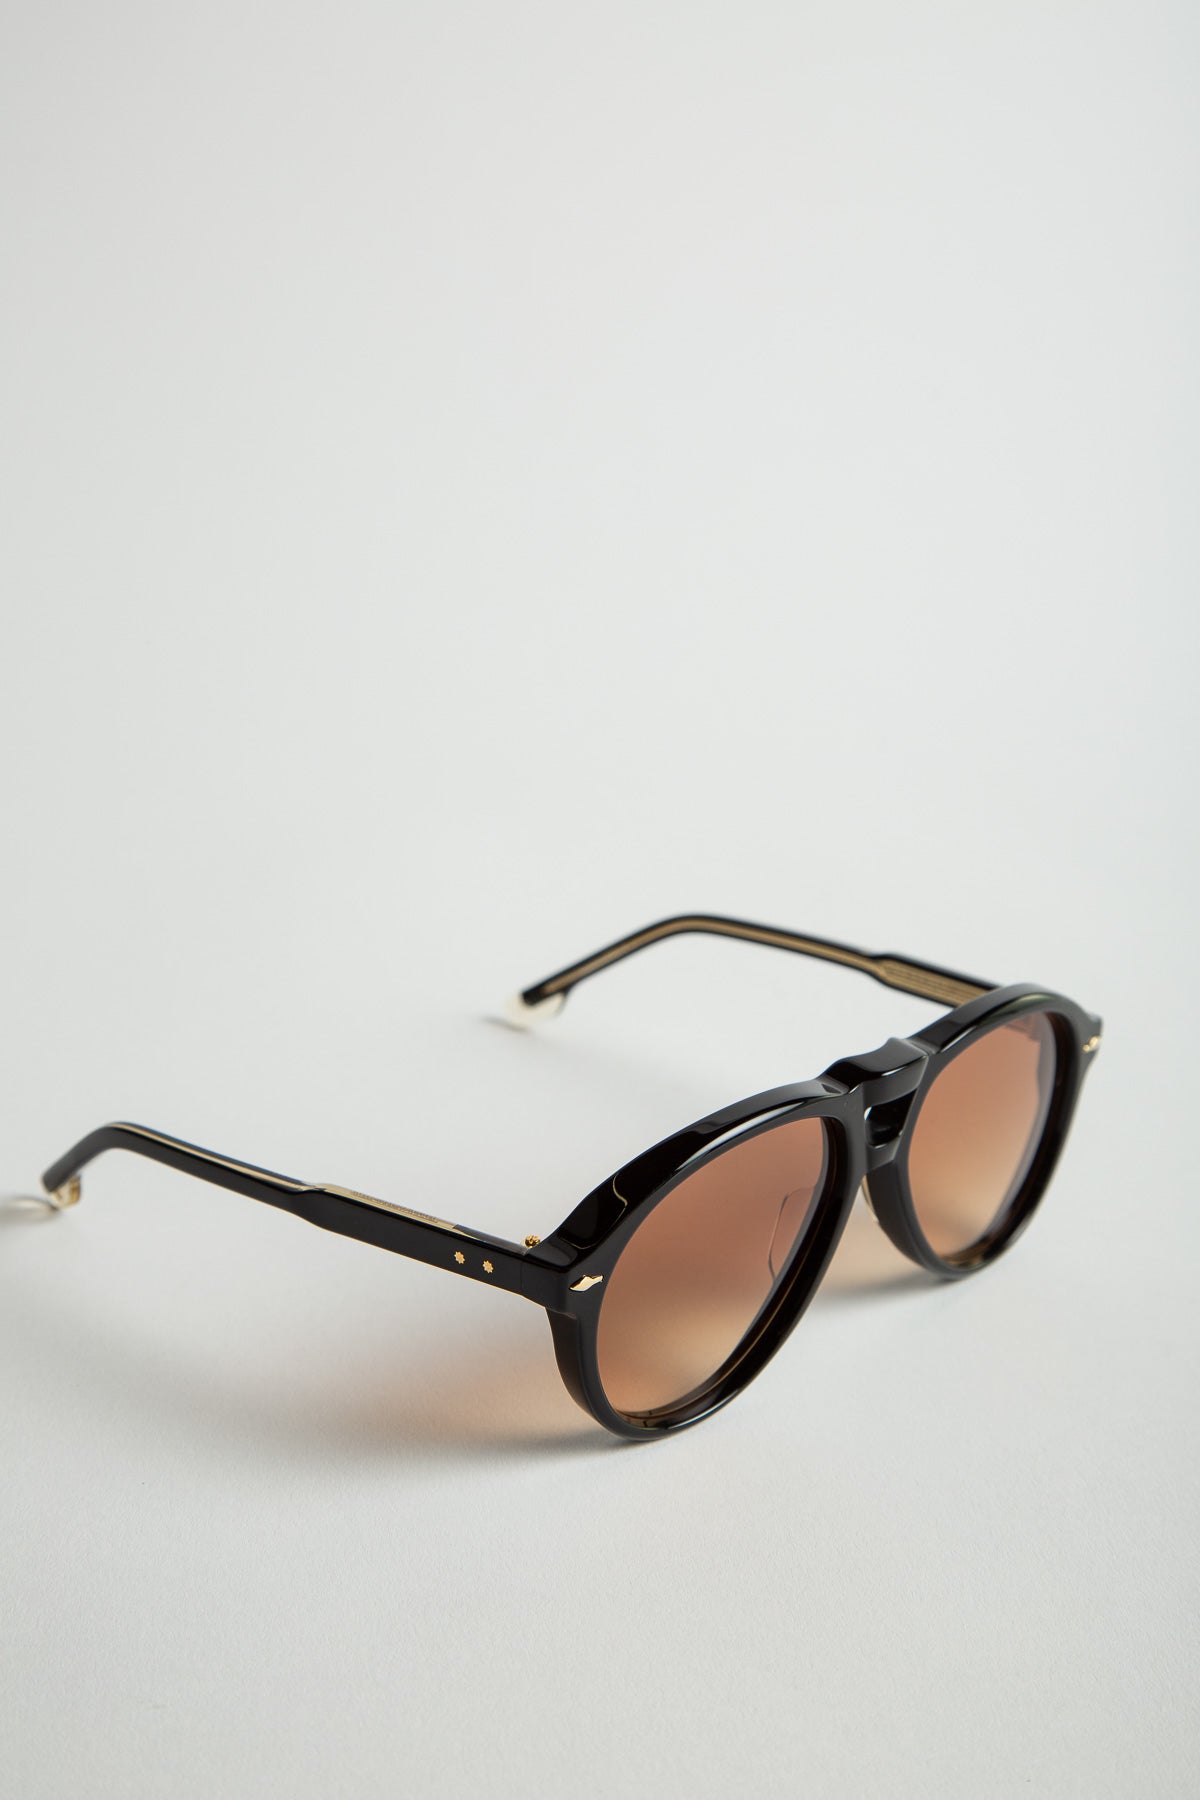 JACQUES MARIE MAGE | VALKYRIE SUNGLASSES